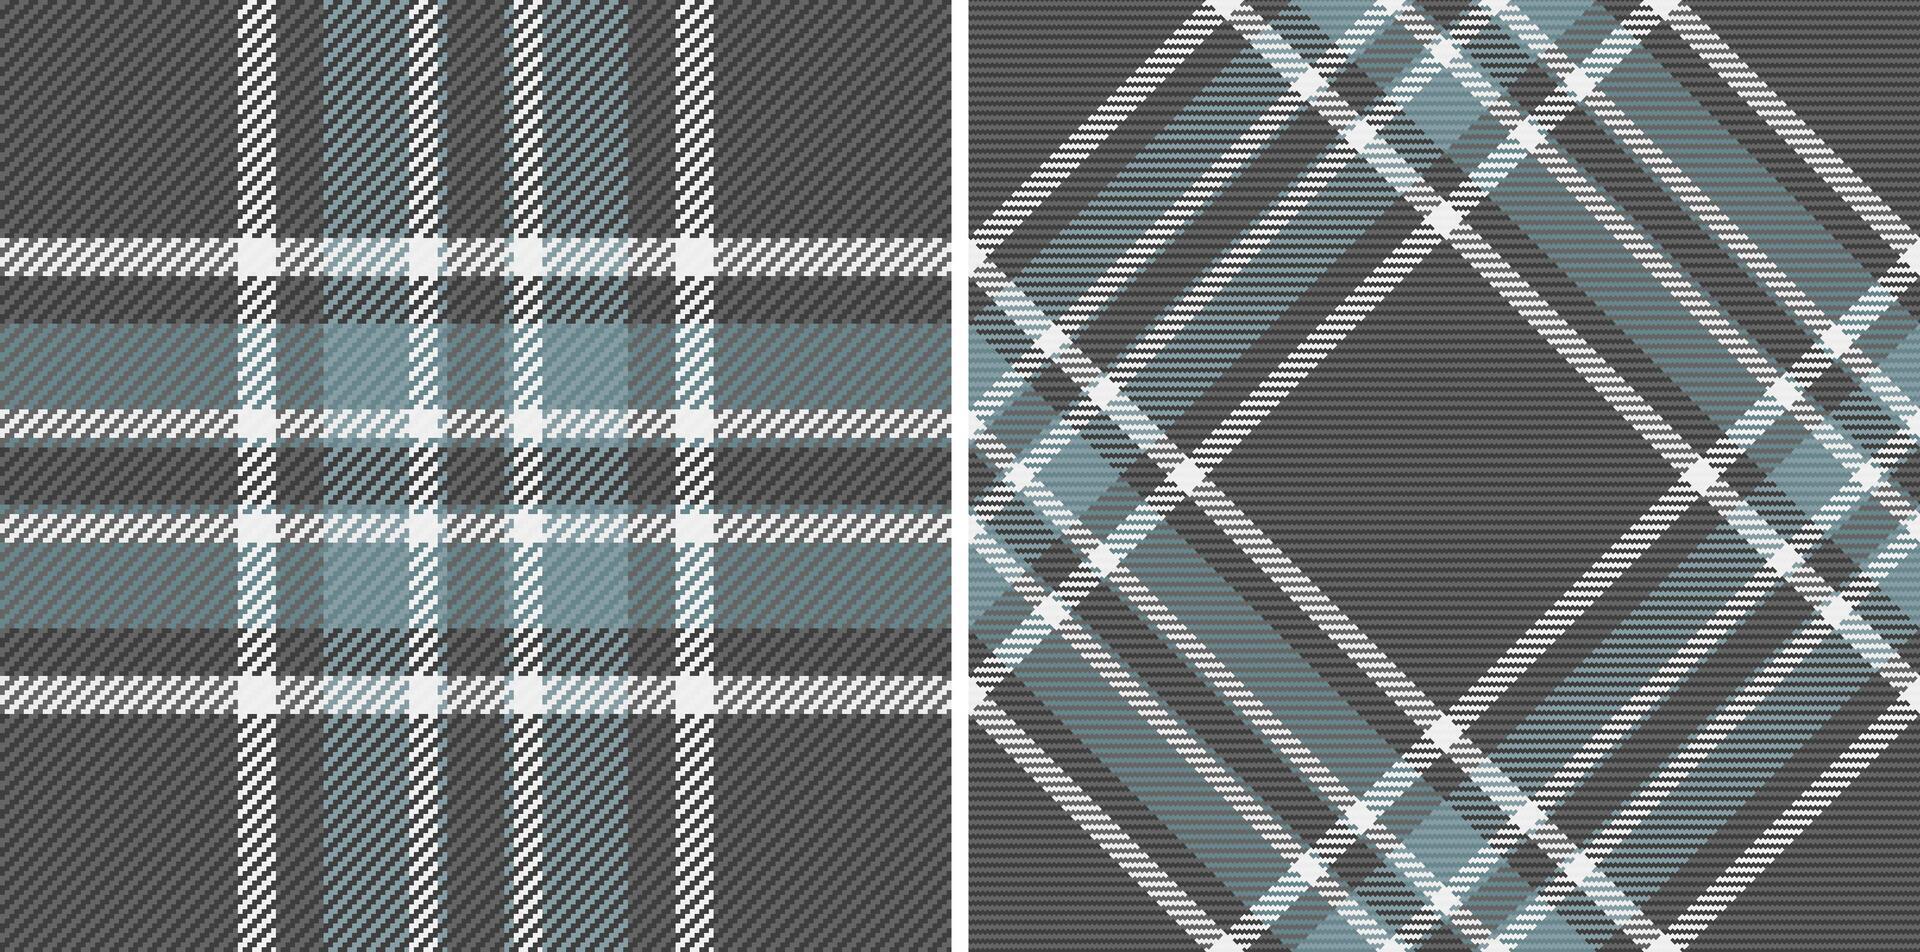 Plaid tartan pattern of seamless texture textile with a vector check fabric background.